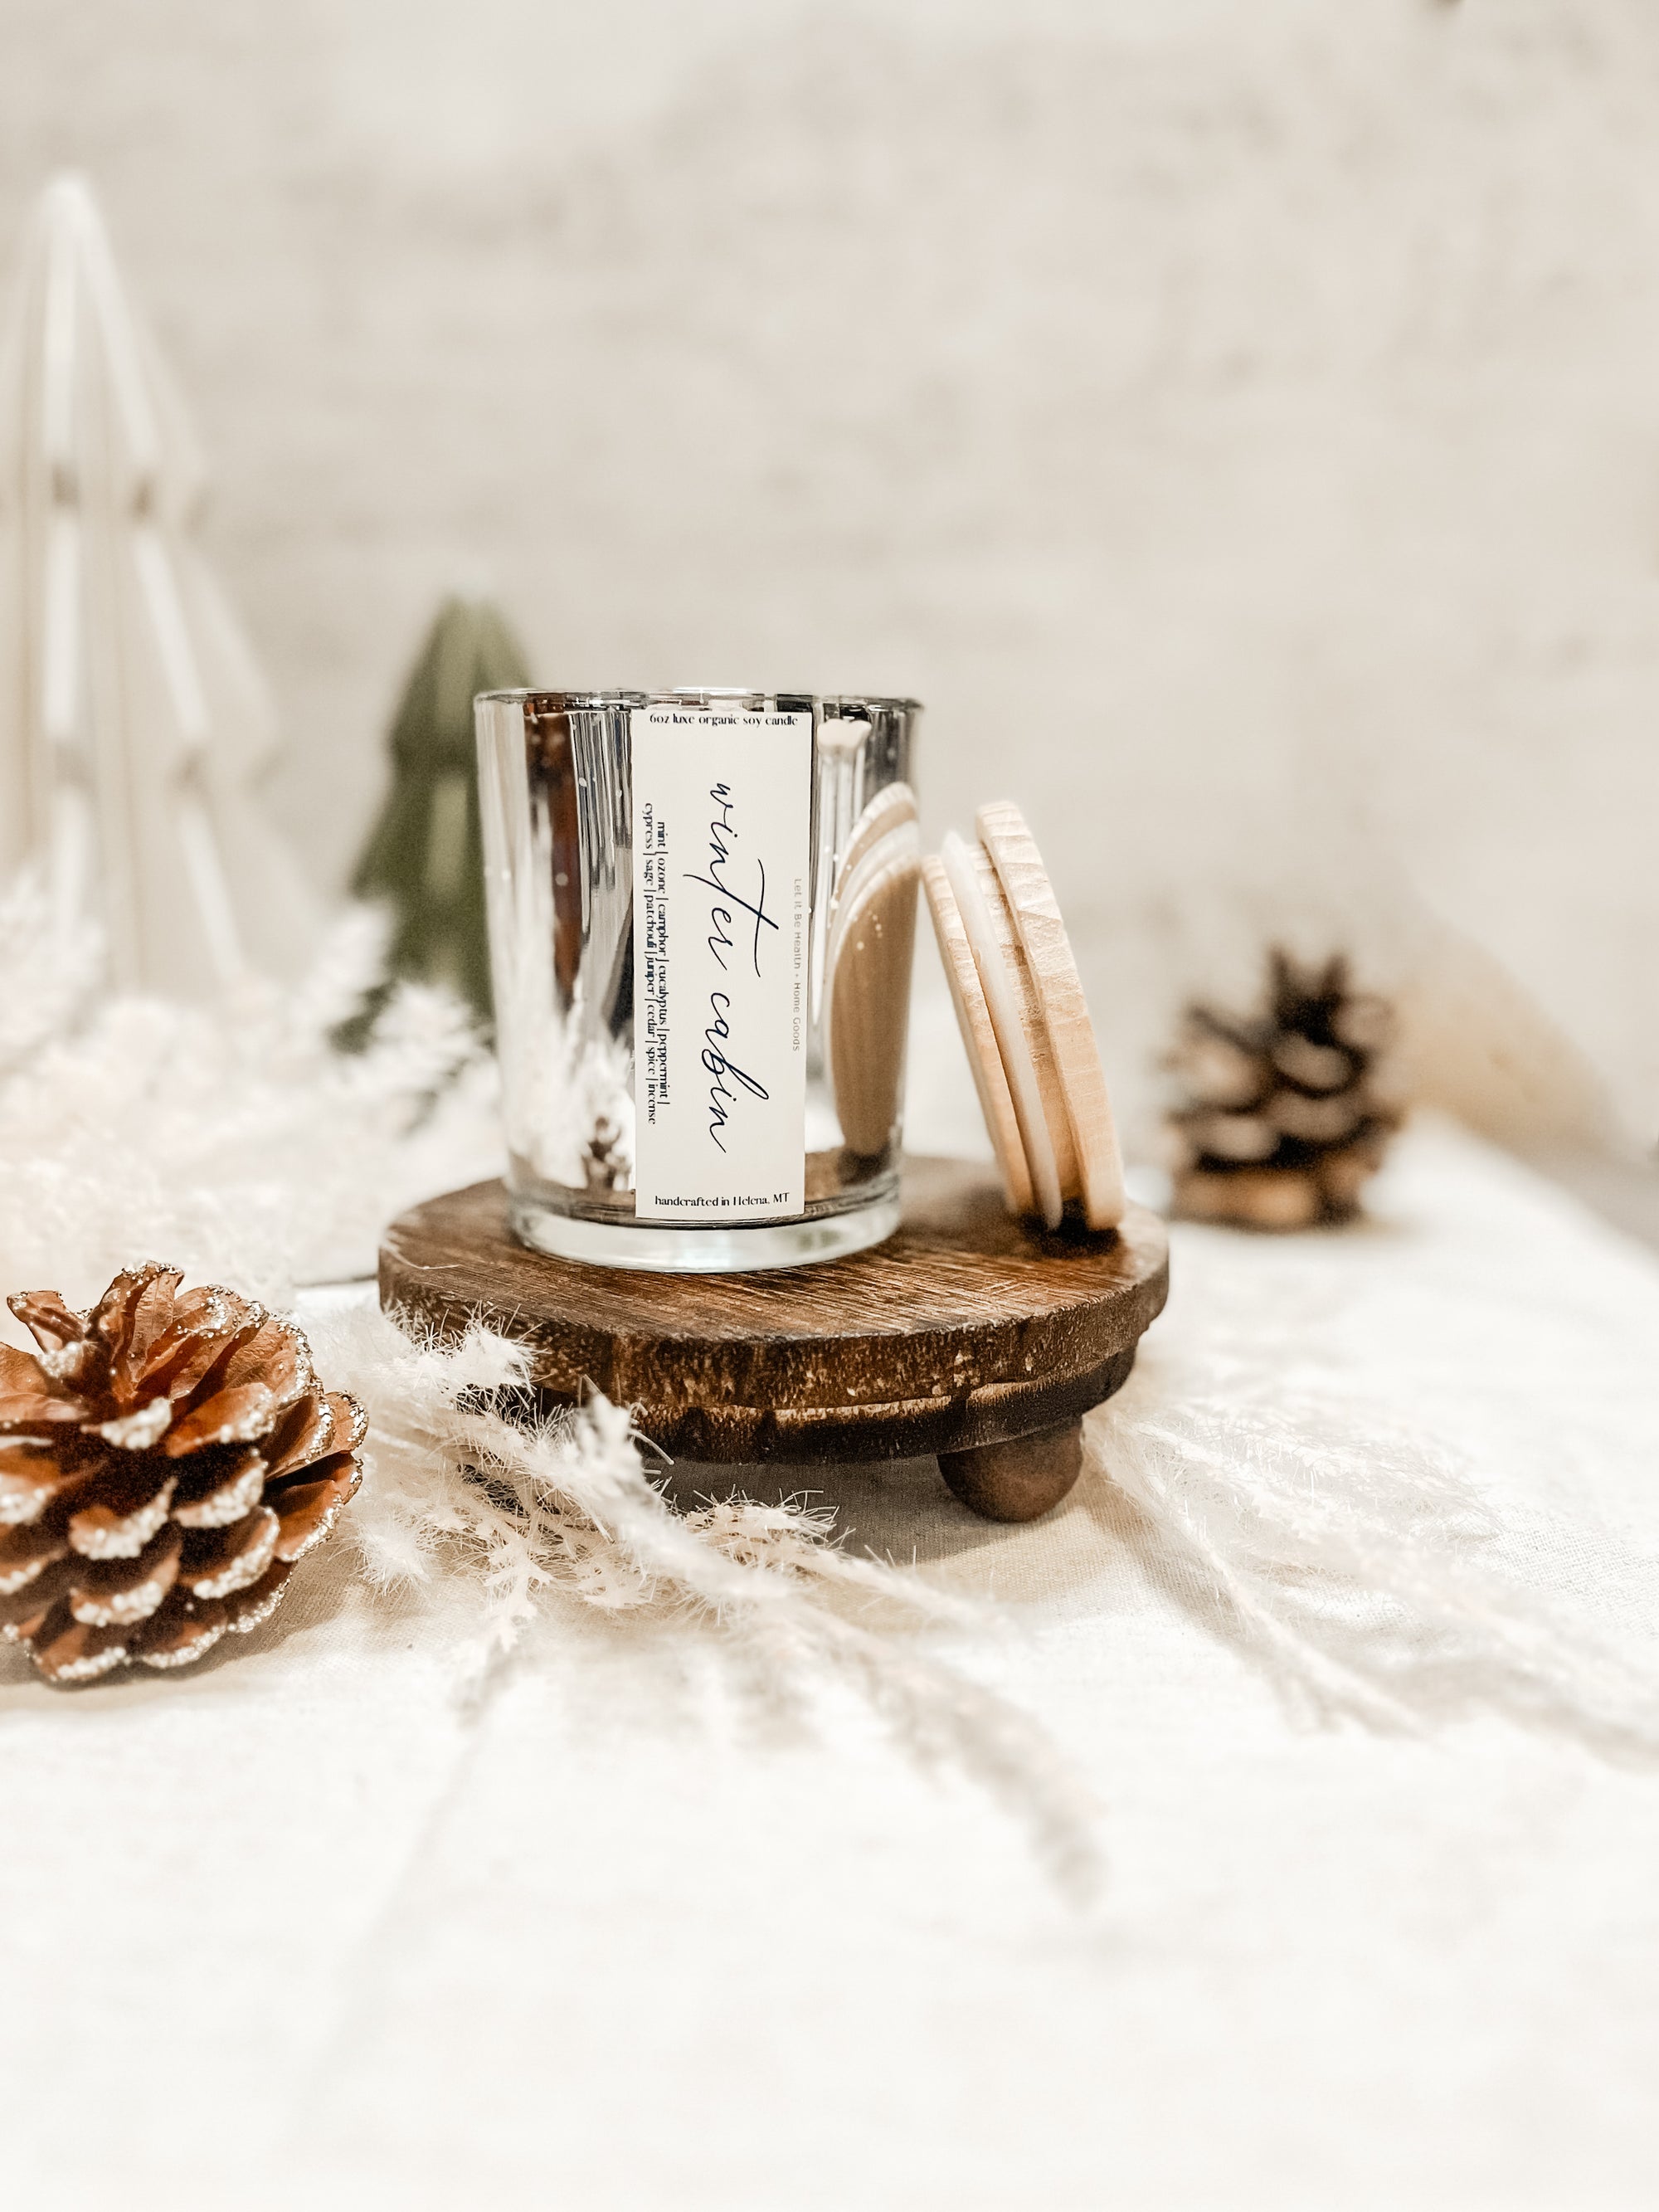 Winter Cabin Wooden Wick Soy Candle